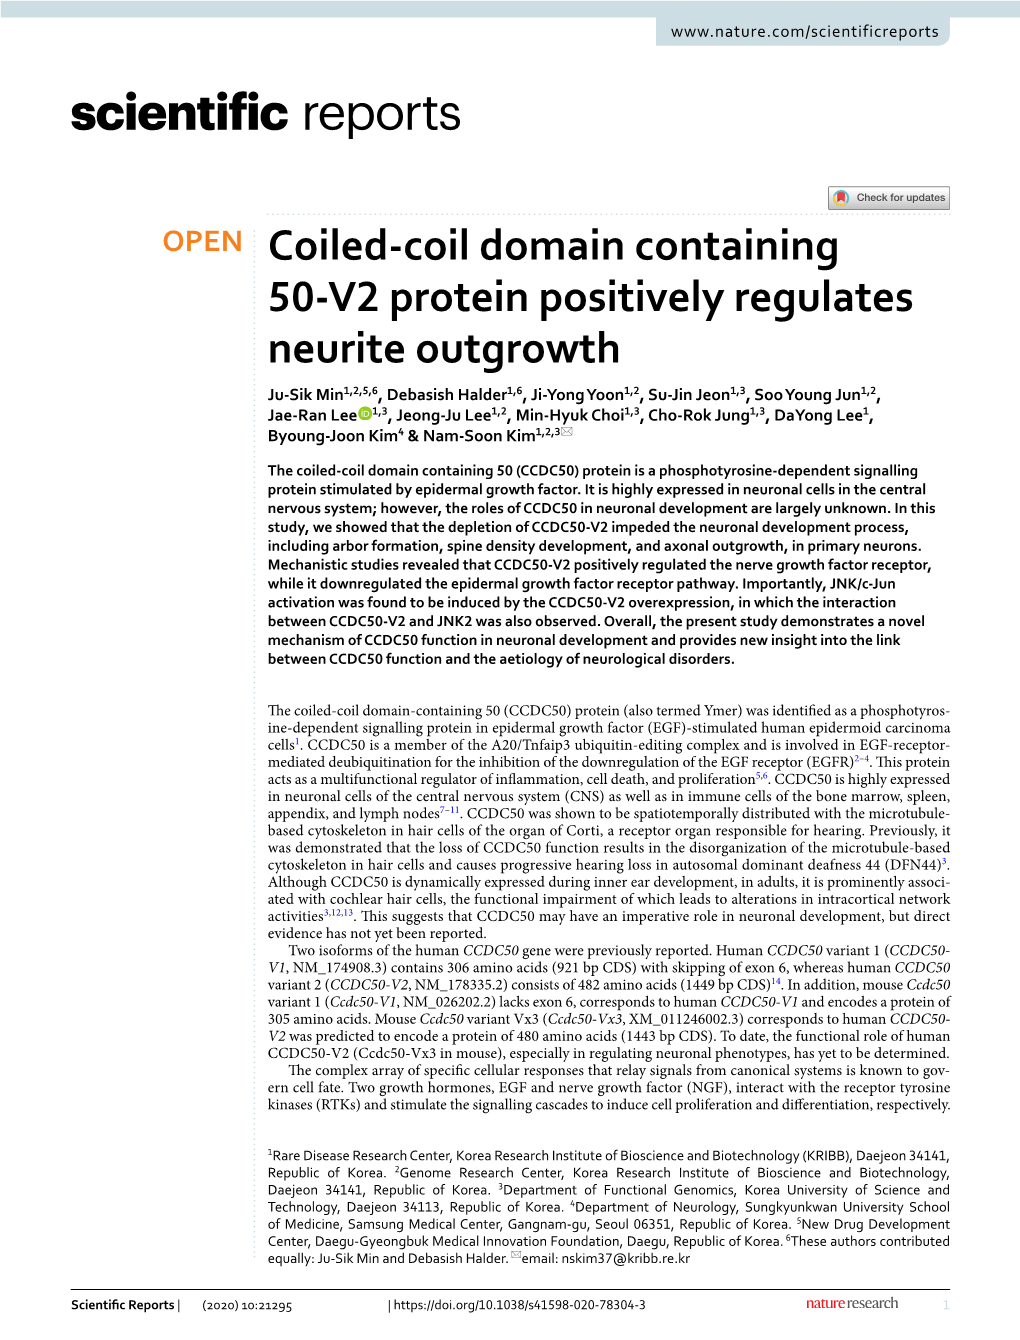 Coiled-Coil Domain Containing 50-V2 Protein Positively Regulates Neurite